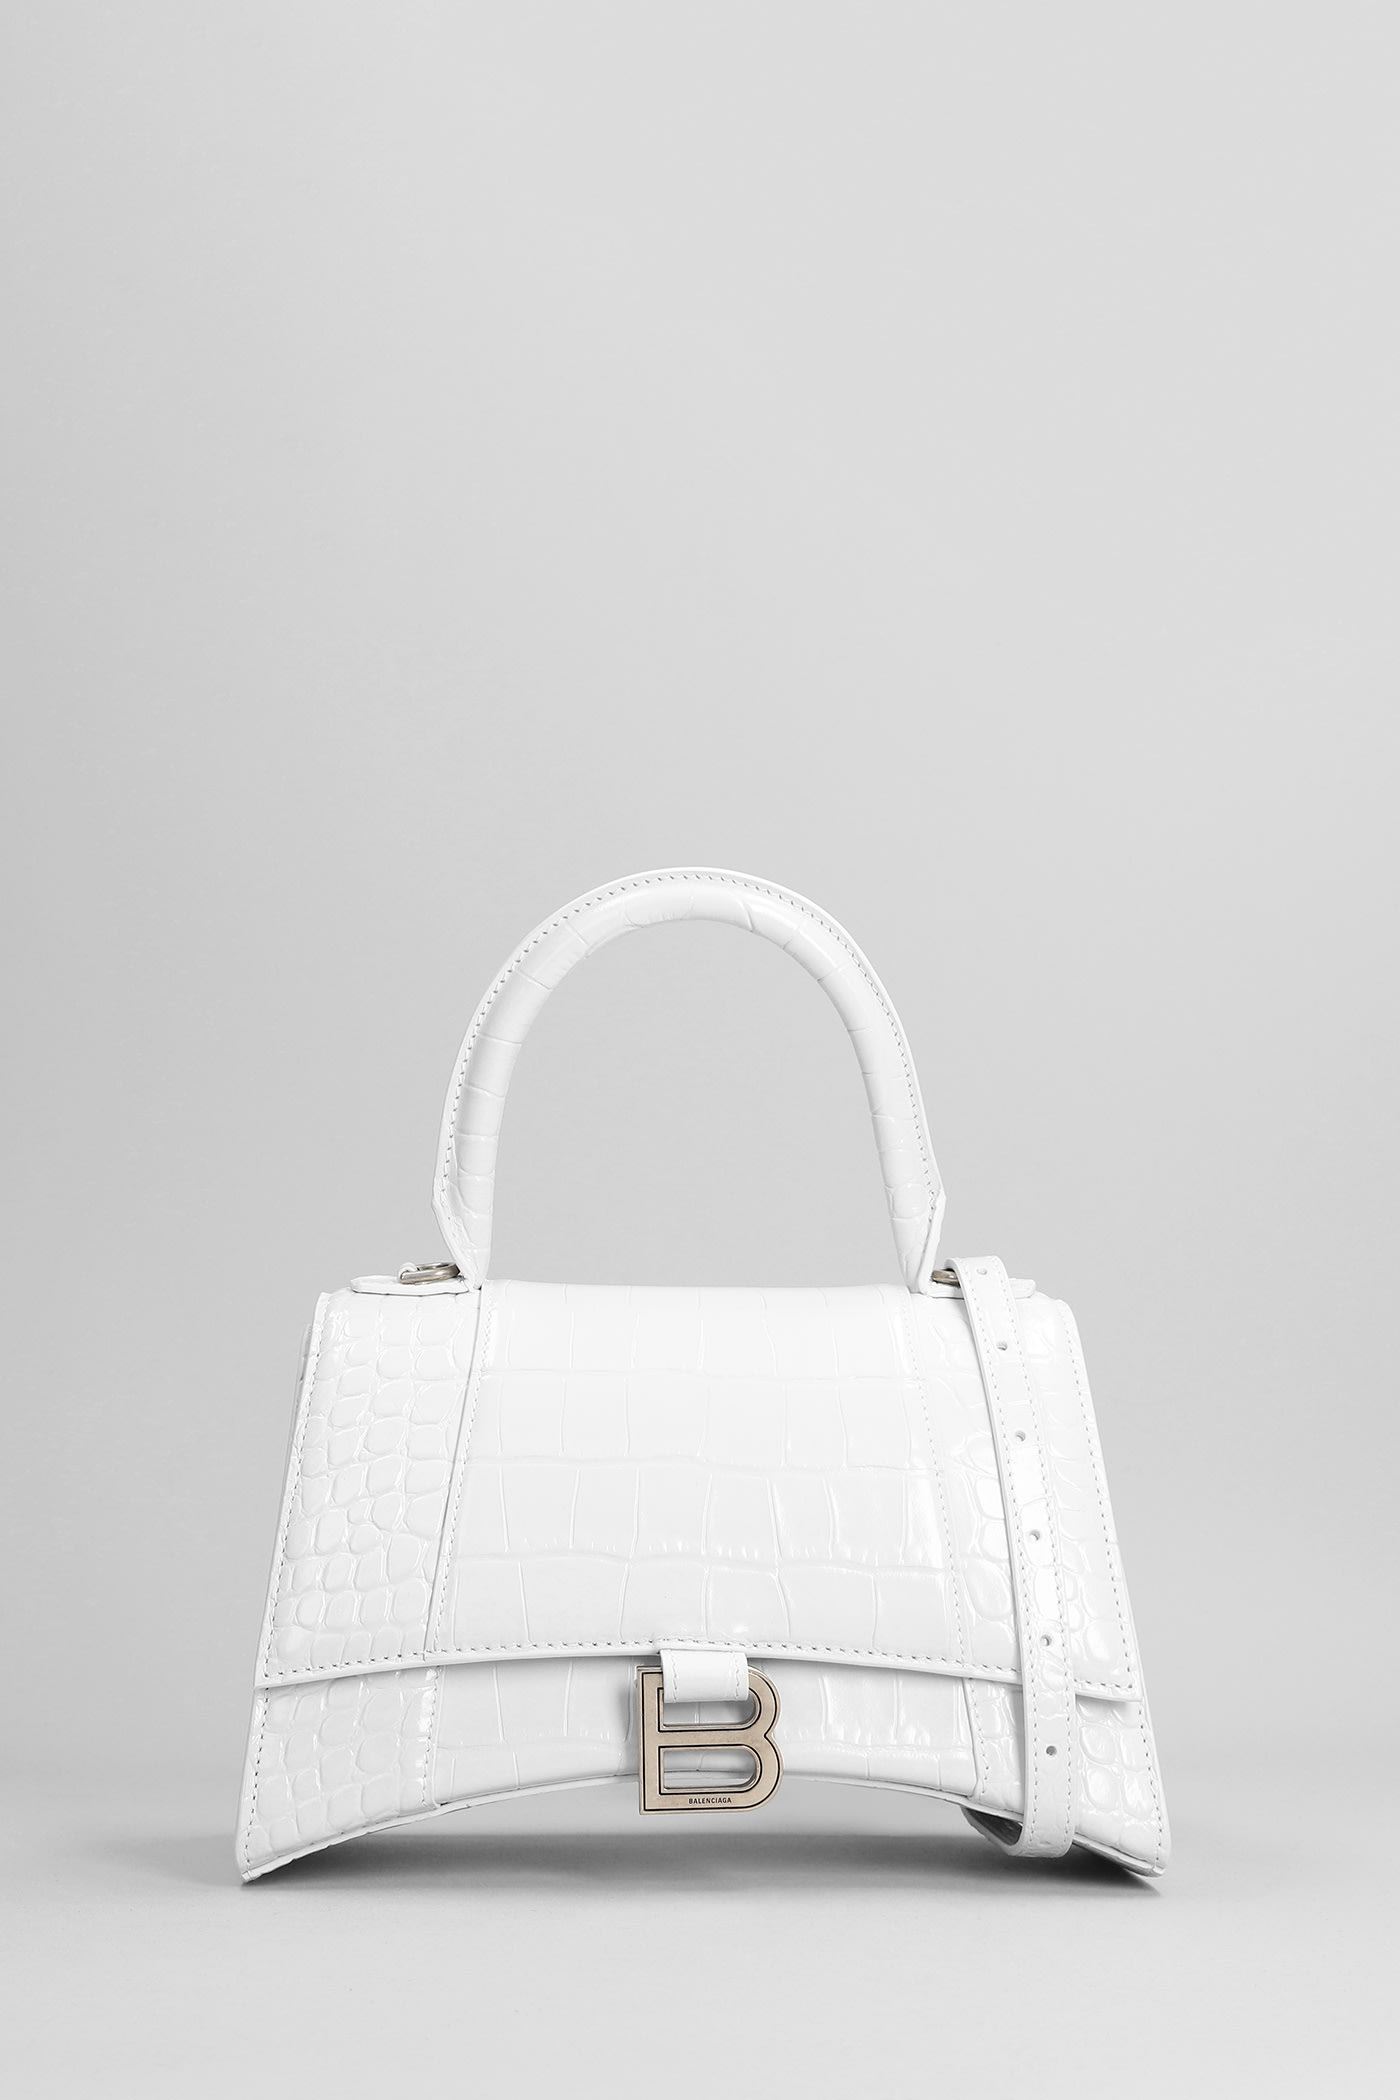 Hourglass B Shoulder Bag In White Leather